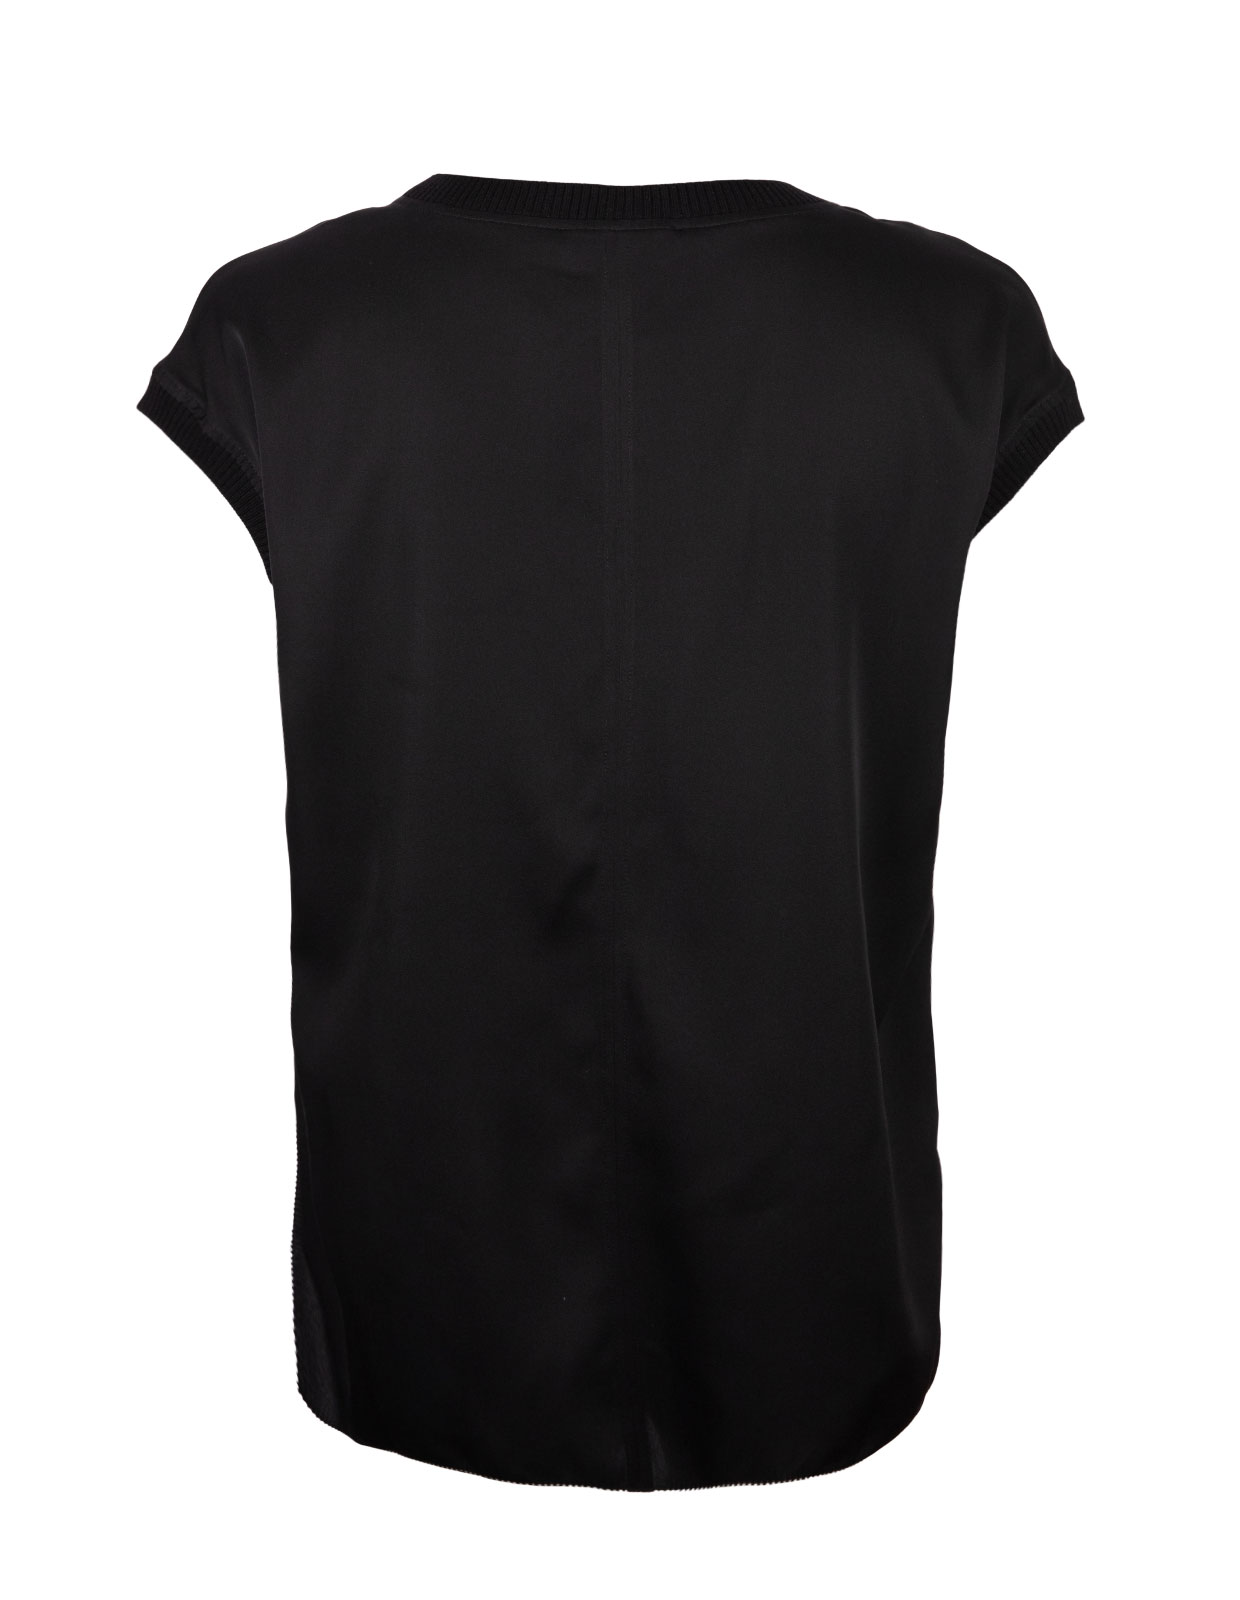 Silk Top with Rib Details Black